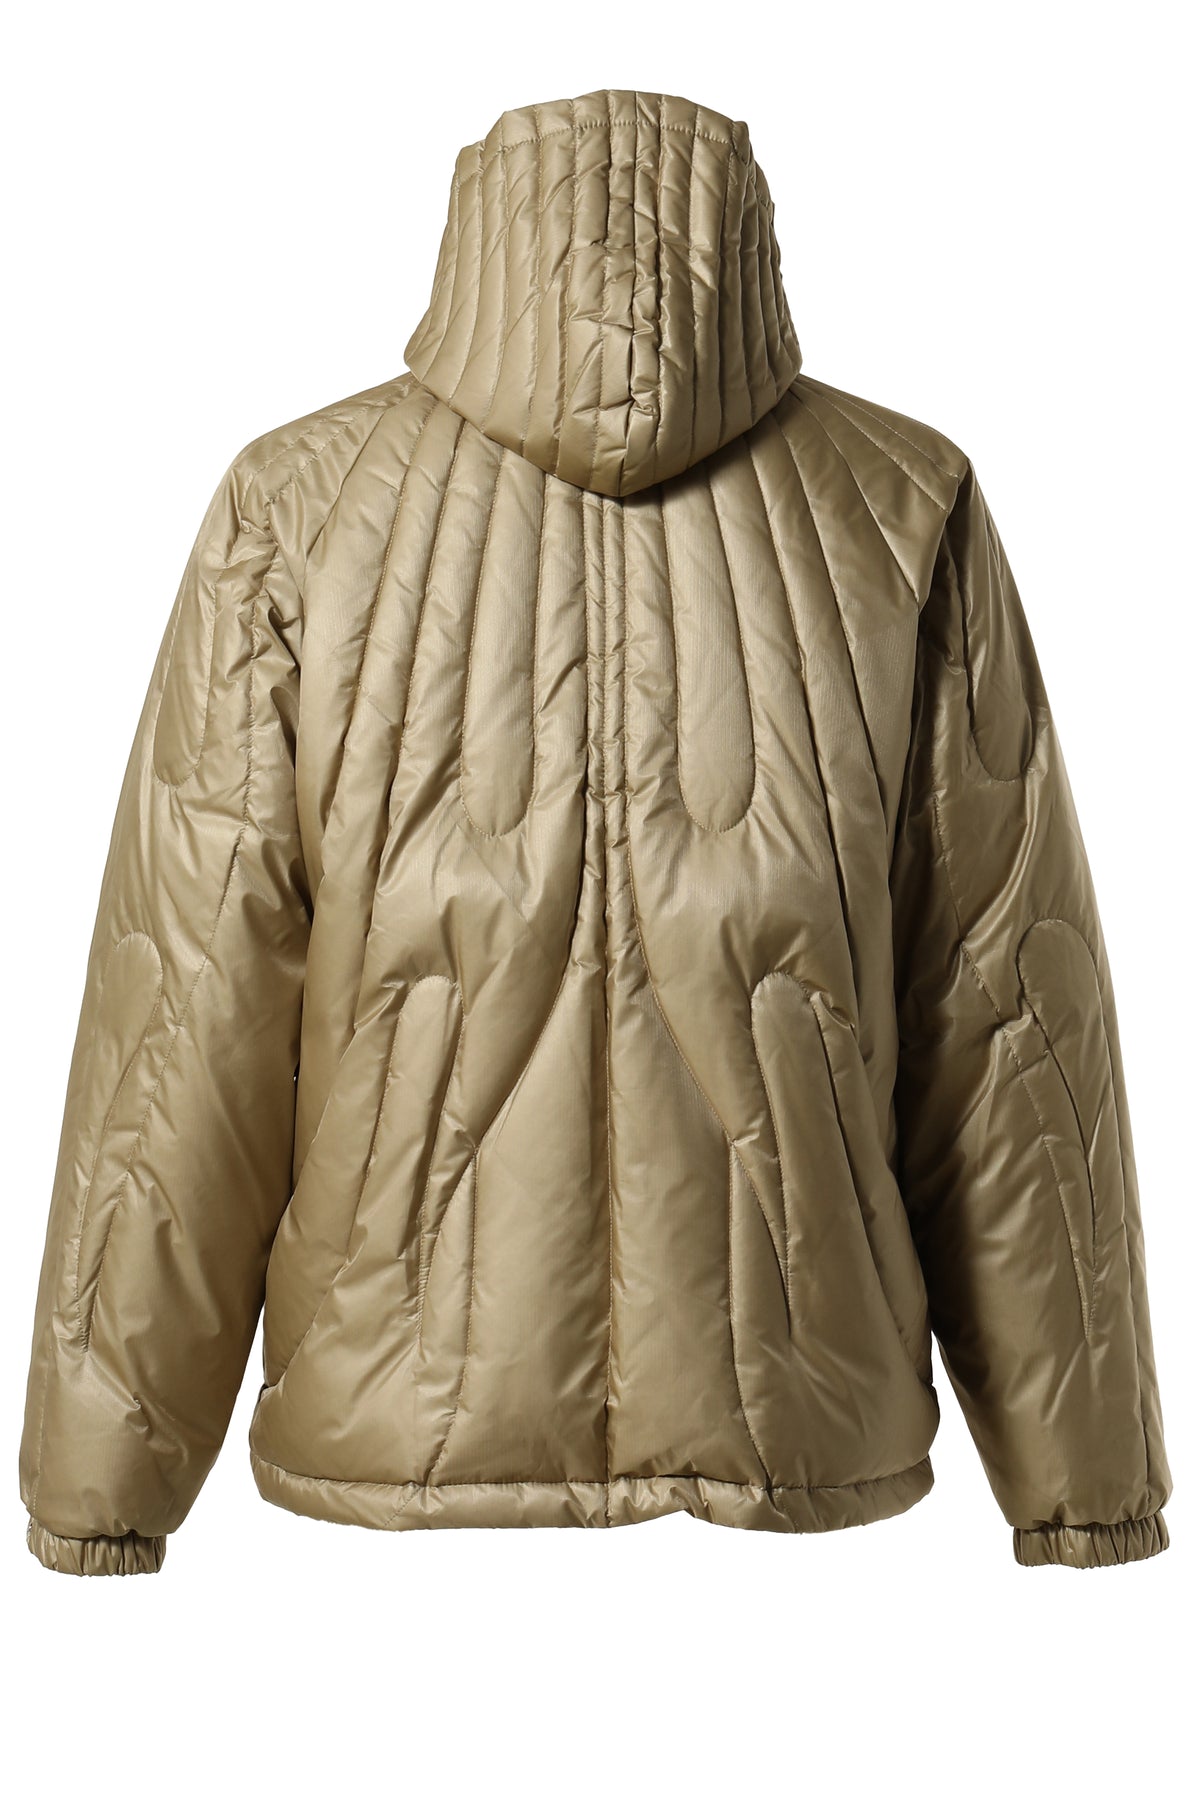 CAVE GOOSE DOWN JACKET / BEI